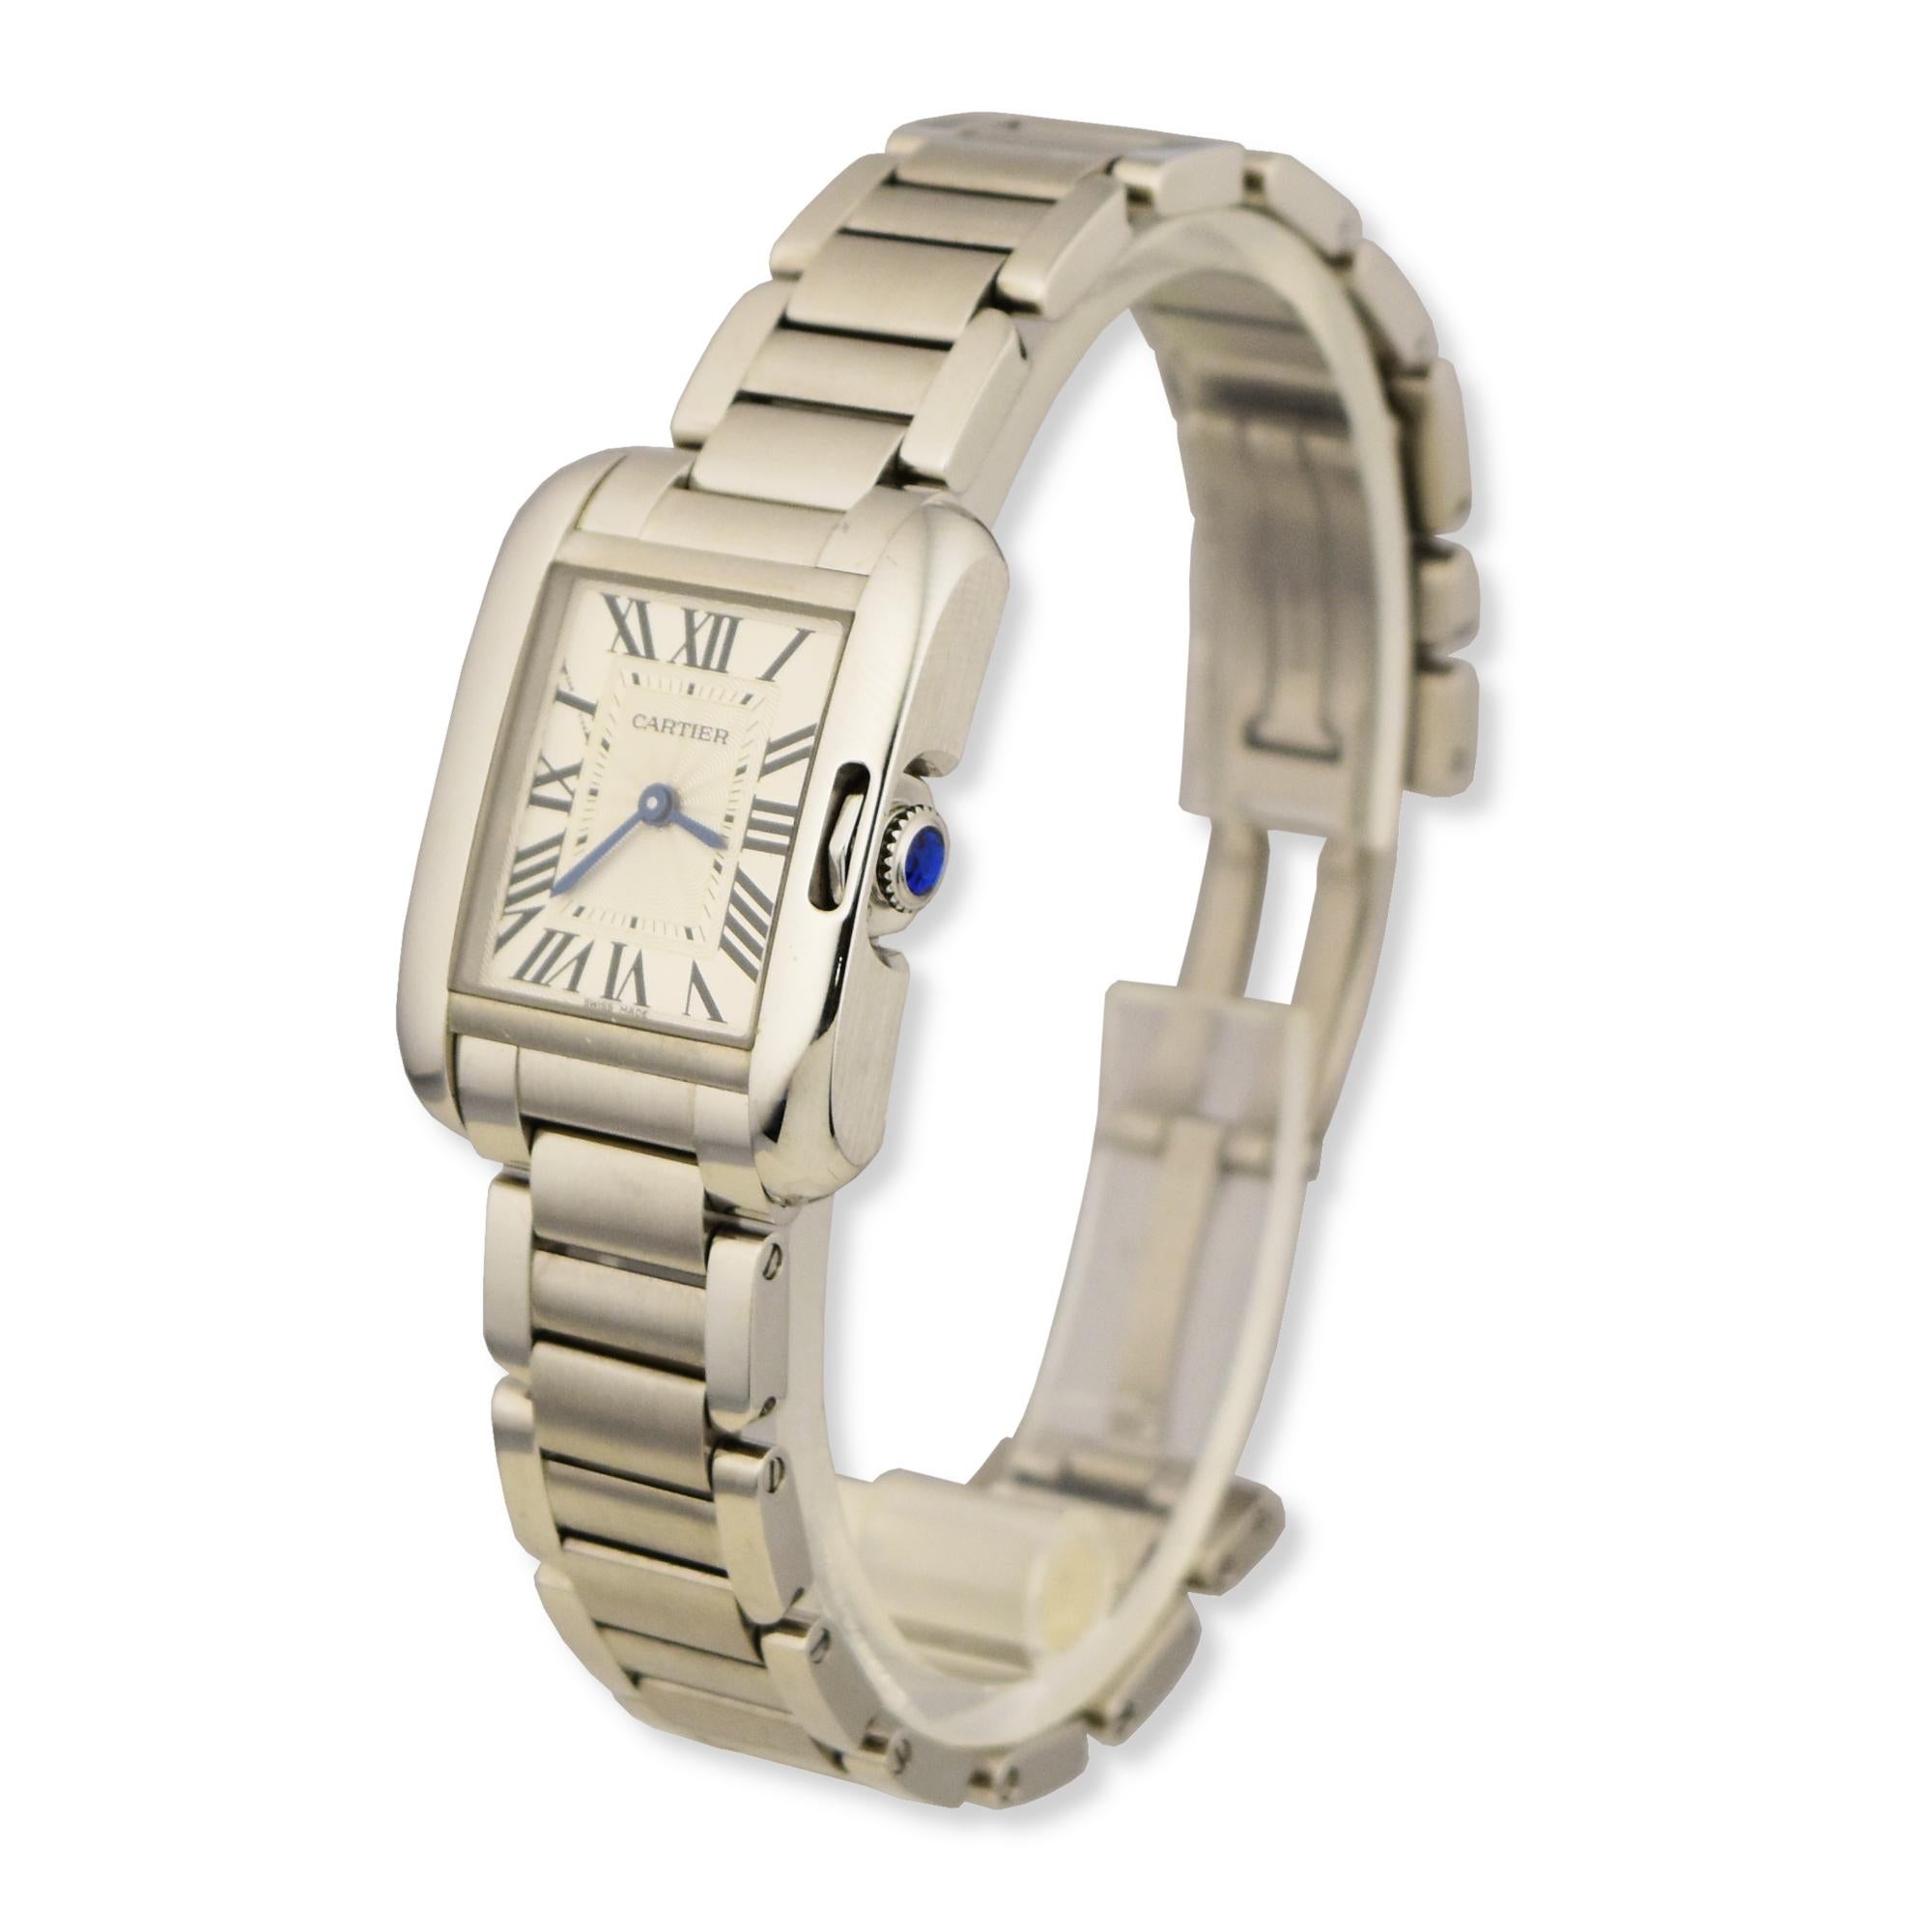 Cartier Tank Anglaise Stainless Steel Silver Dial Watch In Excellent Condition For Sale In Miami, FL